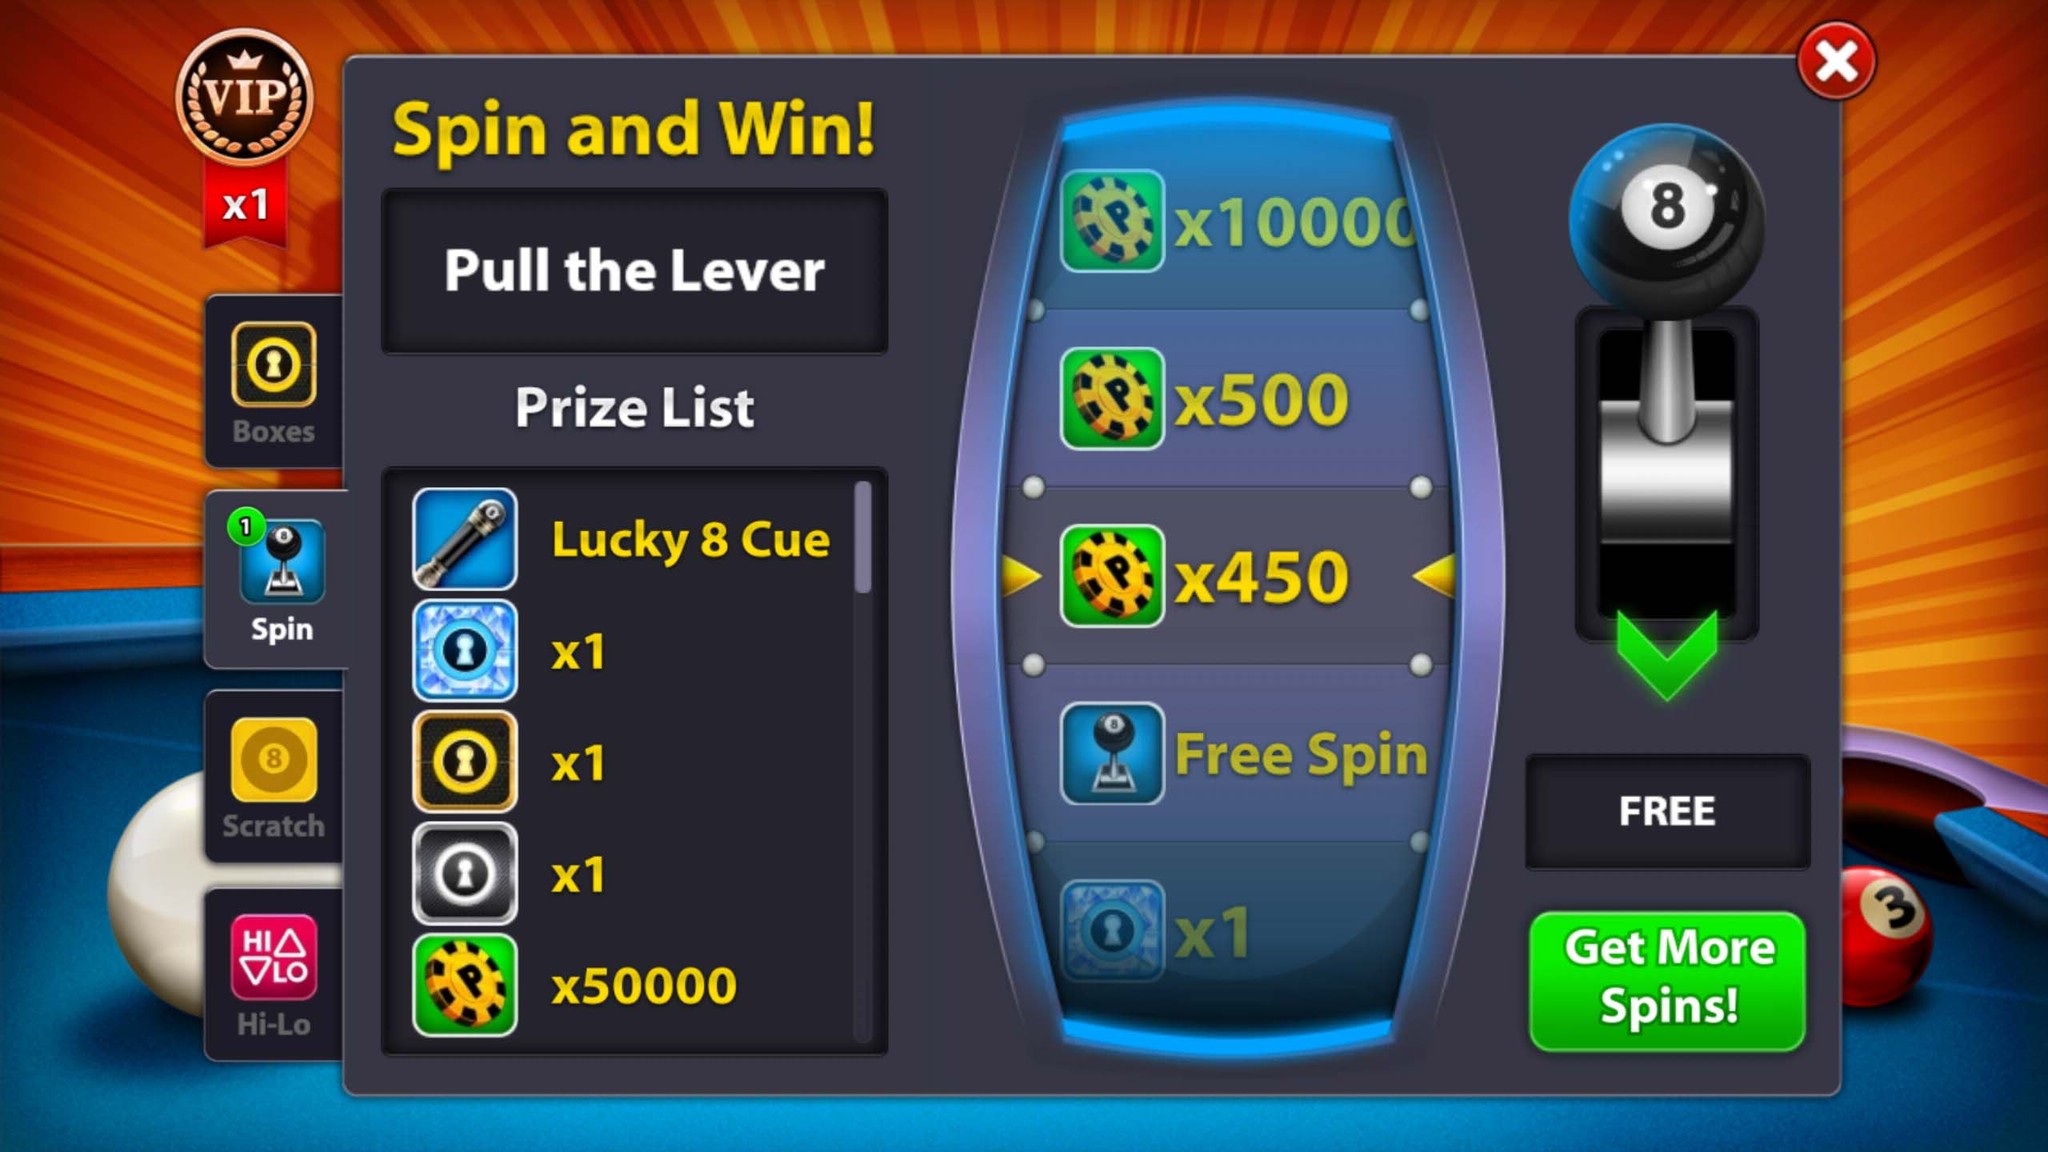 Vip spinning. Grand Heist-Spin &win and Golden Spin 8 Ball Pool. Spin and win. 8 Ball Pool Play a Golden Spin. Где находится Spin and win в 8 Ball Pool.